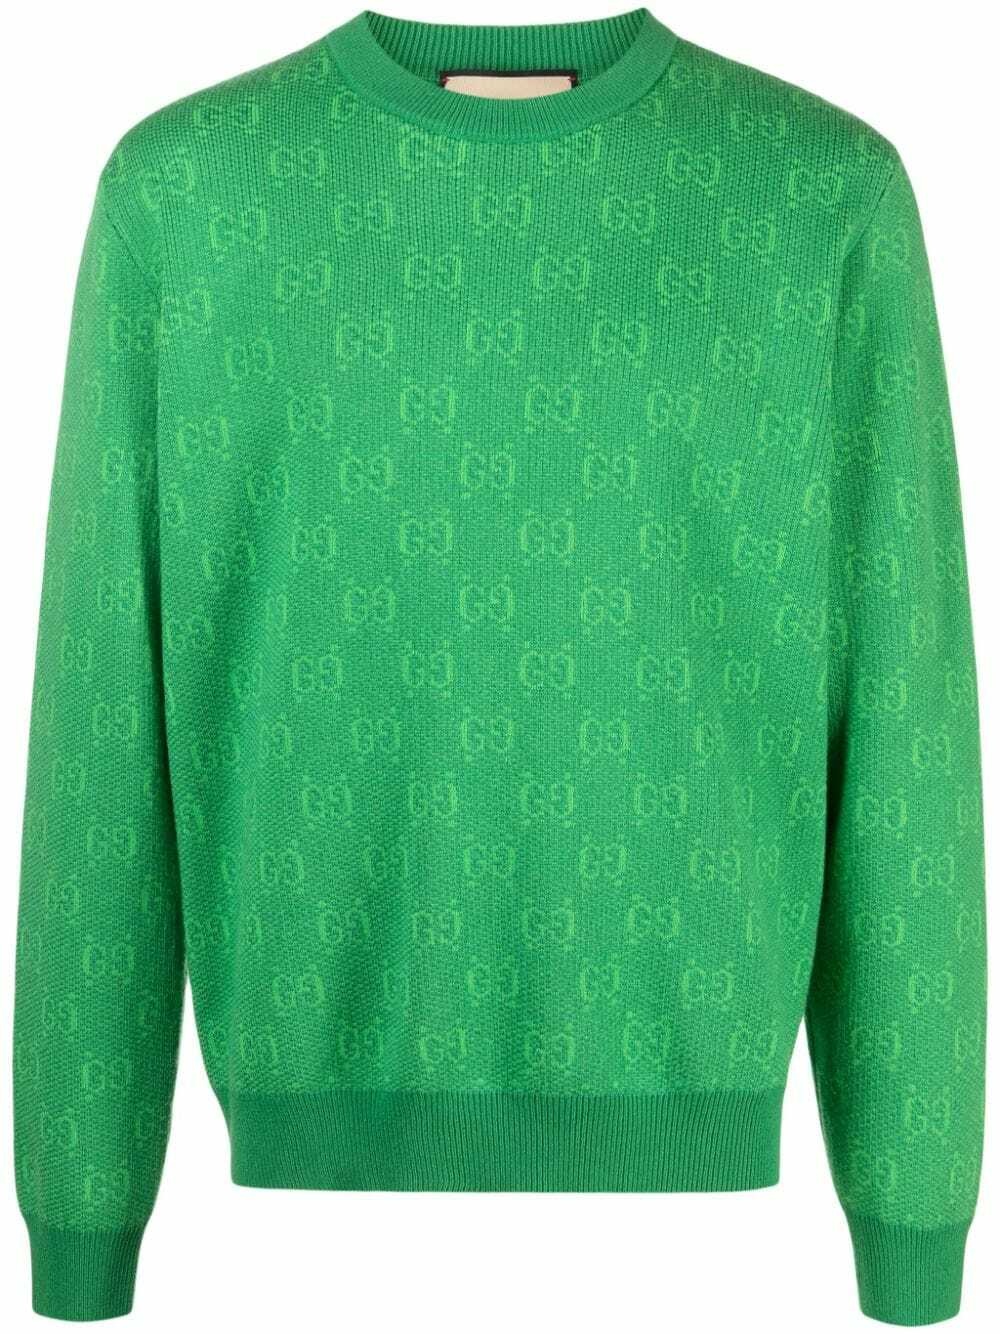 Gucci GG Supreme-jacquard Wool Sweater in Blue for Men